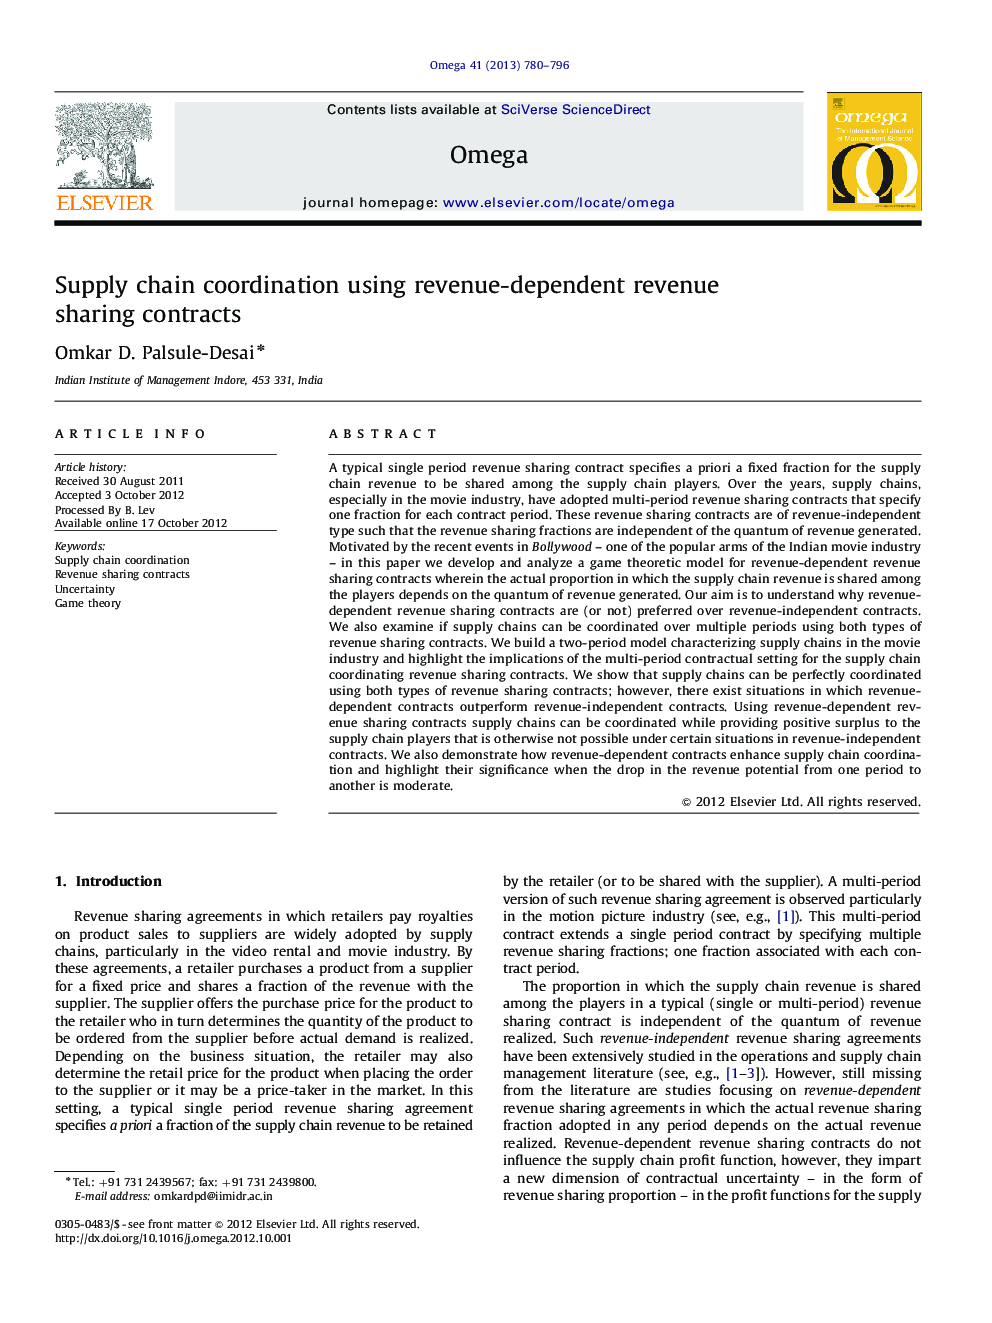 Supply chain coordination using revenue-dependent revenue sharing contracts